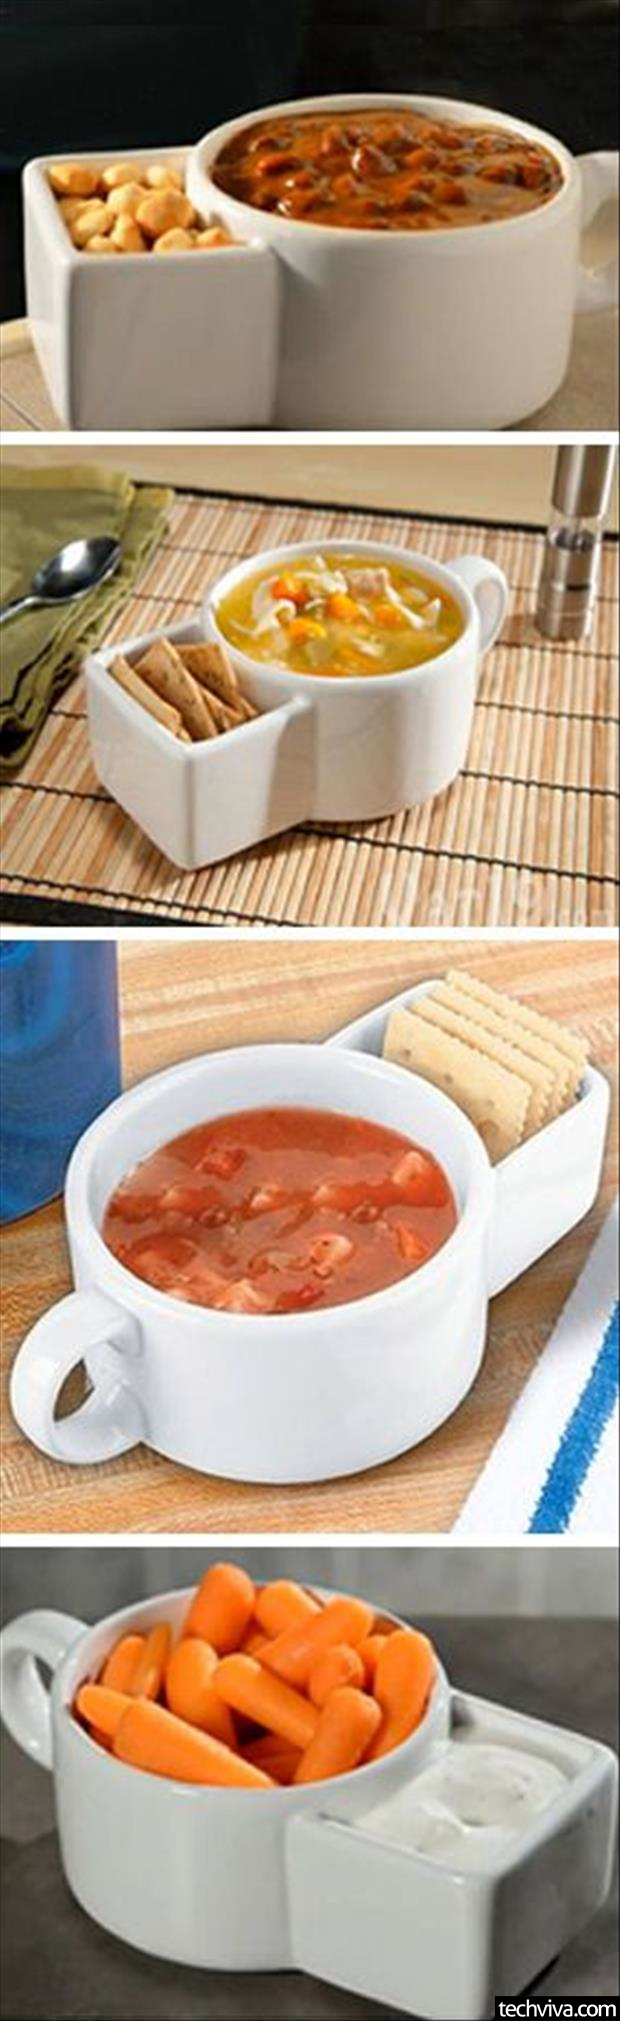 soup-and-crackers